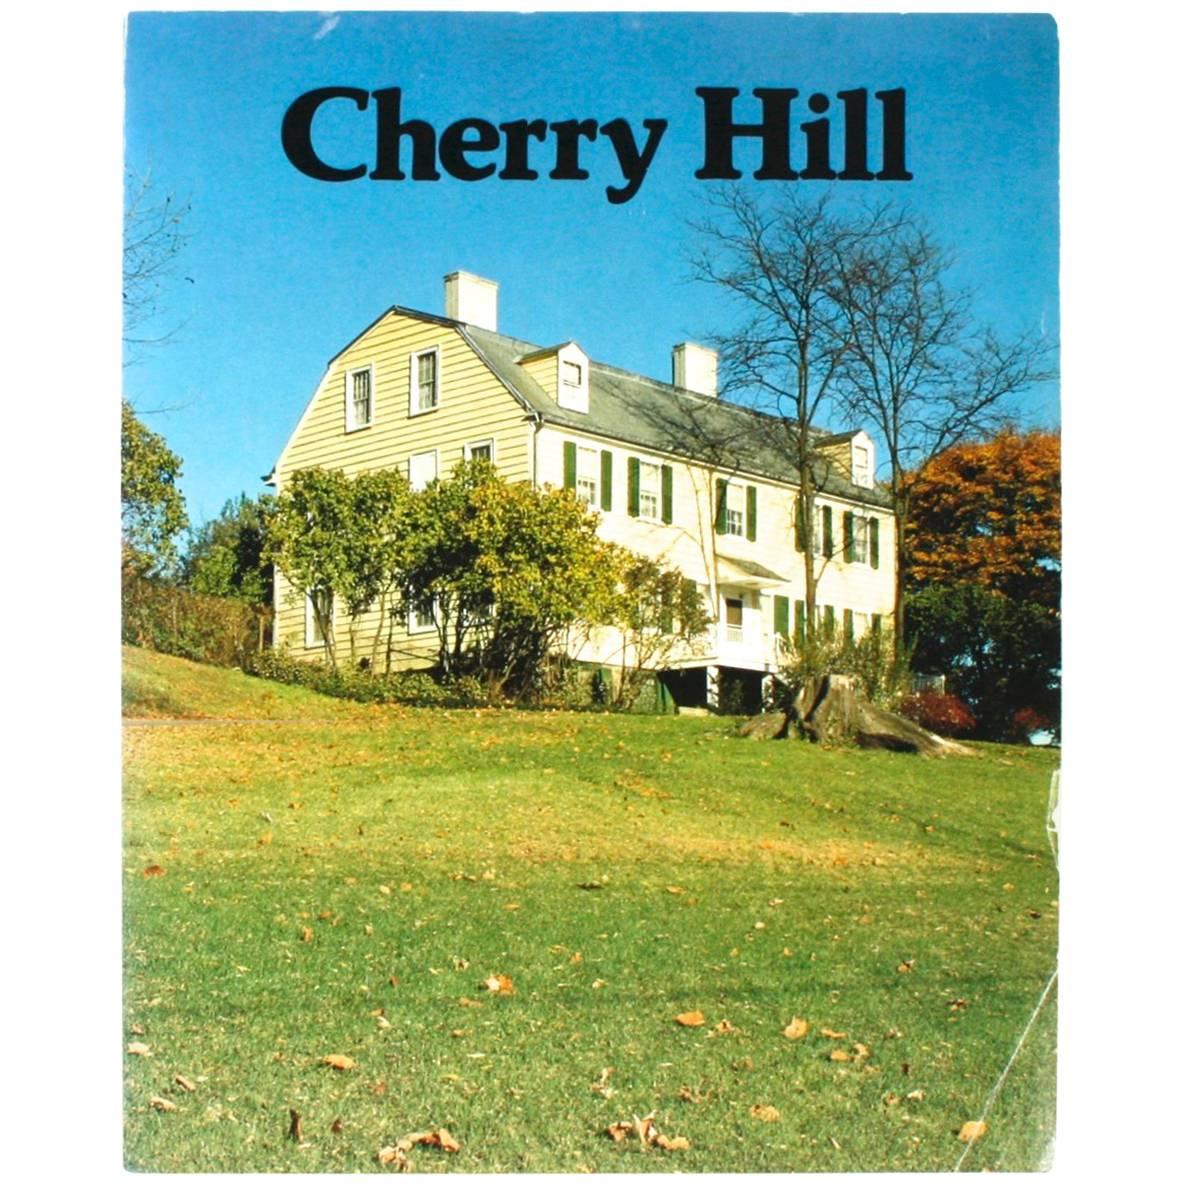 "Cherry Hill" by Roderic H. Blackburn For Sale